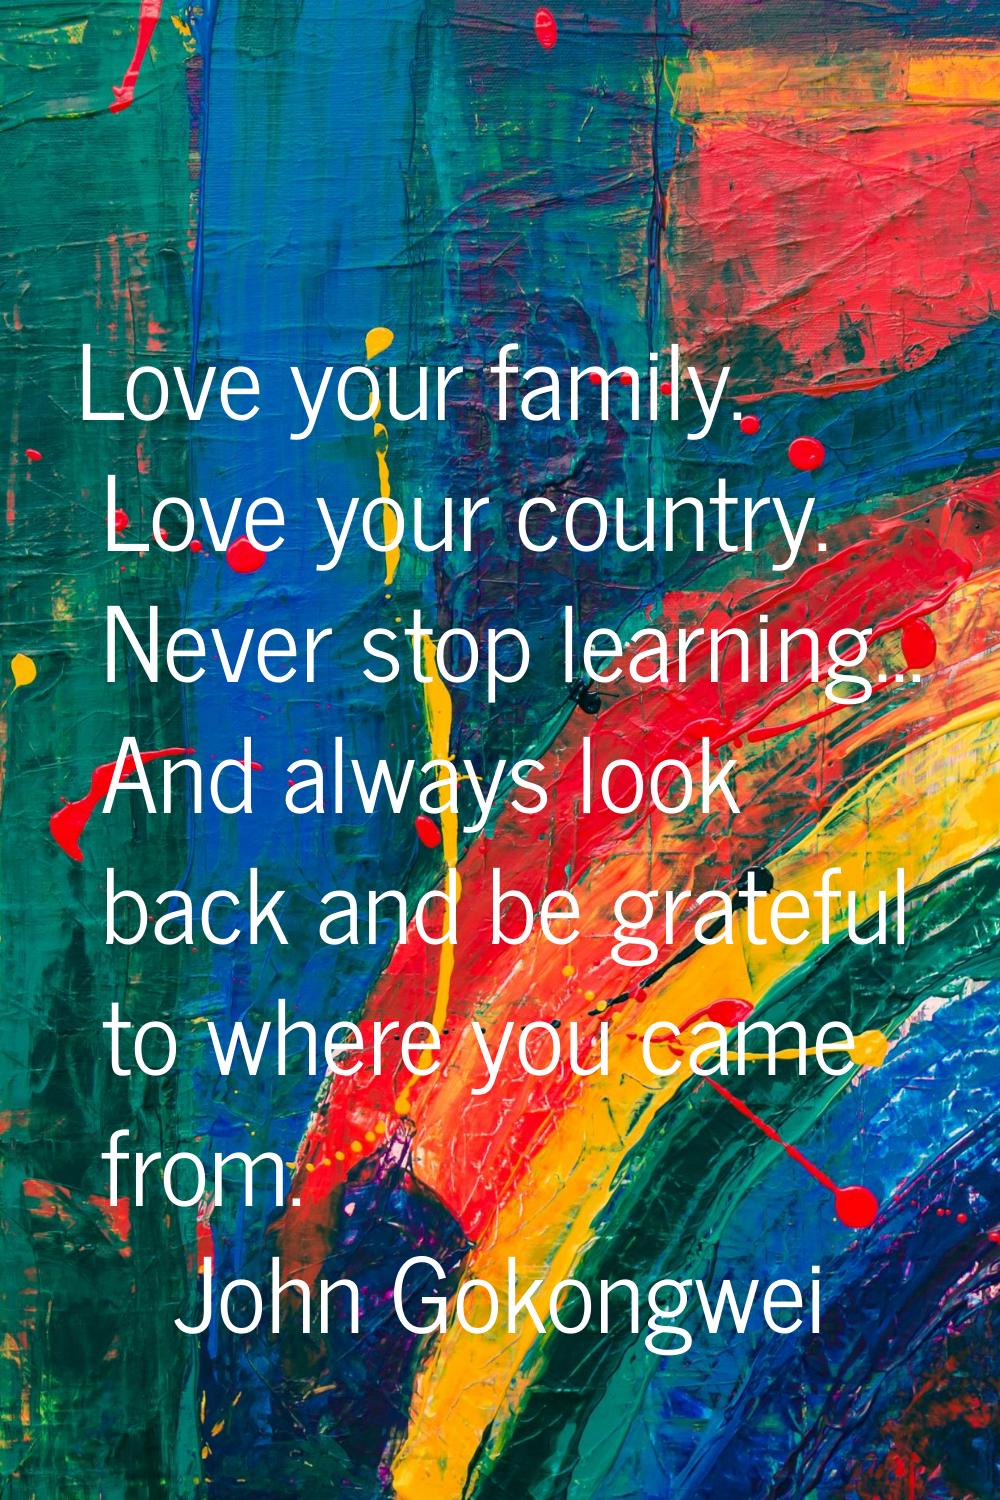 Love your family. Love your country. Never stop learning... And always look back and be grateful to